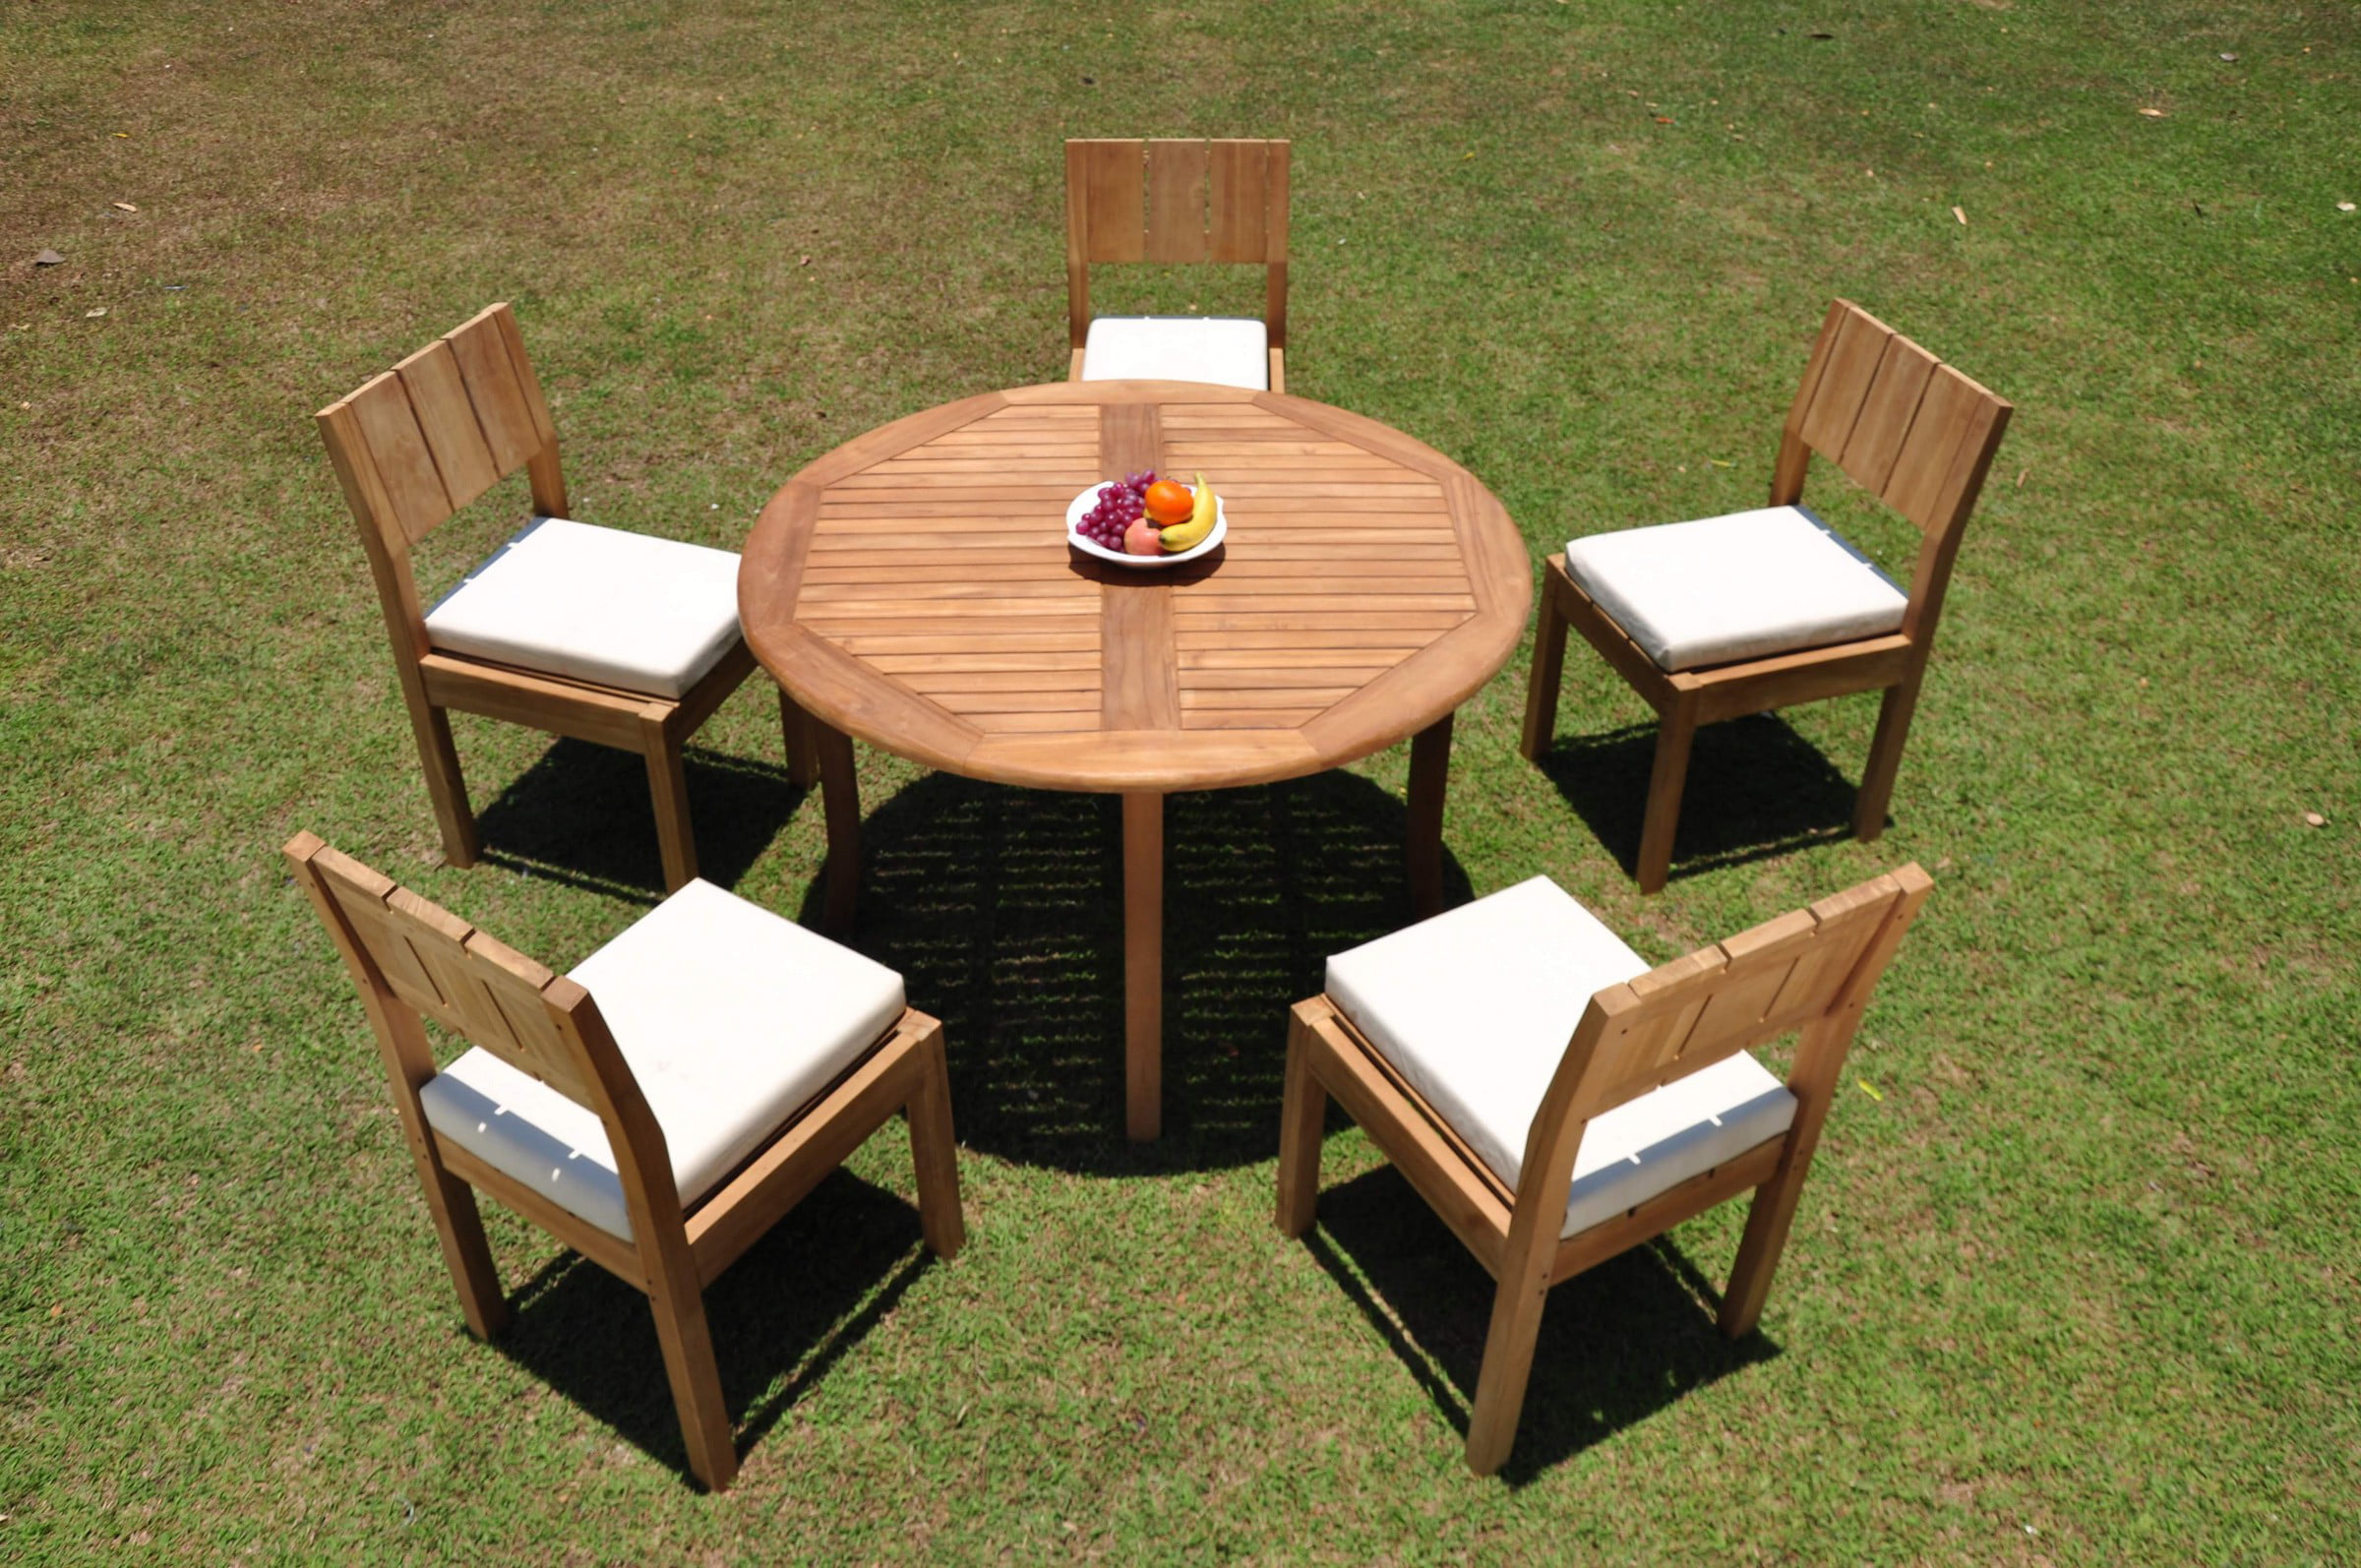 Teak Dining Table Clearance: Grab A Bargain Today